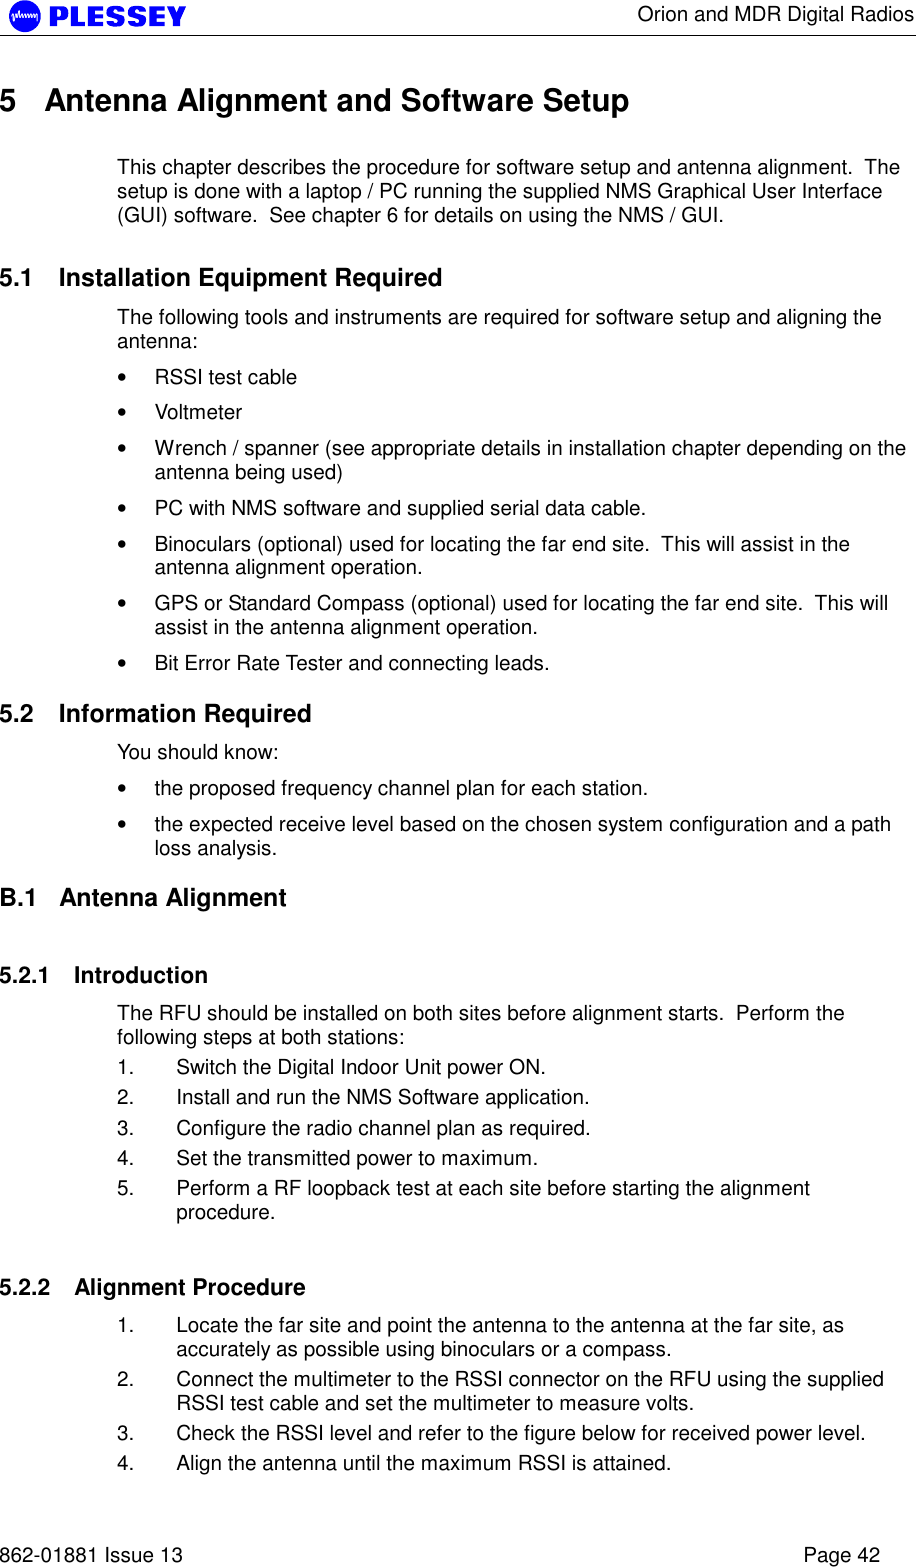      Orion and MDR Digital Radios   862-01881 Issue 13    Page 42 5  Antenna Alignment and Software Setup  This chapter describes the procedure for software setup and antenna alignment.  The setup is done with a laptop / PC running the supplied NMS Graphical User Interface (GUI) software.  See chapter 6 for details on using the NMS / GUI.  5.1  Installation Equipment Required The following tools and instruments are required for software setup and aligning the antenna: • RSSI test cable • Voltmeter • Wrench / spanner (see appropriate details in installation chapter depending on the antenna being used) • PC with NMS software and supplied serial data cable. • Binoculars (optional) used for locating the far end site.  This will assist in the antenna alignment operation. • GPS or Standard Compass (optional) used for locating the far end site.  This will assist in the antenna alignment operation. • Bit Error Rate Tester and connecting leads.  5.2 Information Required You should know: • the proposed frequency channel plan for each station.   • the expected receive level based on the chosen system configuration and a path loss analysis.  B.1 Antenna Alignment 5.2.1 Introduction The RFU should be installed on both sites before alignment starts.  Perform the following steps at both stations: 1.  Switch the Digital Indoor Unit power ON.  2.  Install and run the NMS Software application. 3.  Configure the radio channel plan as required. 4.  Set the transmitted power to maximum. 5.  Perform a RF loopback test at each site before starting the alignment procedure. 5.2.2 Alignment Procedure 1.  Locate the far site and point the antenna to the antenna at the far site, as accurately as possible using binoculars or a compass. 2.  Connect the multimeter to the RSSI connector on the RFU using the supplied RSSI test cable and set the multimeter to measure volts. 3.  Check the RSSI level and refer to the figure below for received power level. 4.  Align the antenna until the maximum RSSI is attained. 